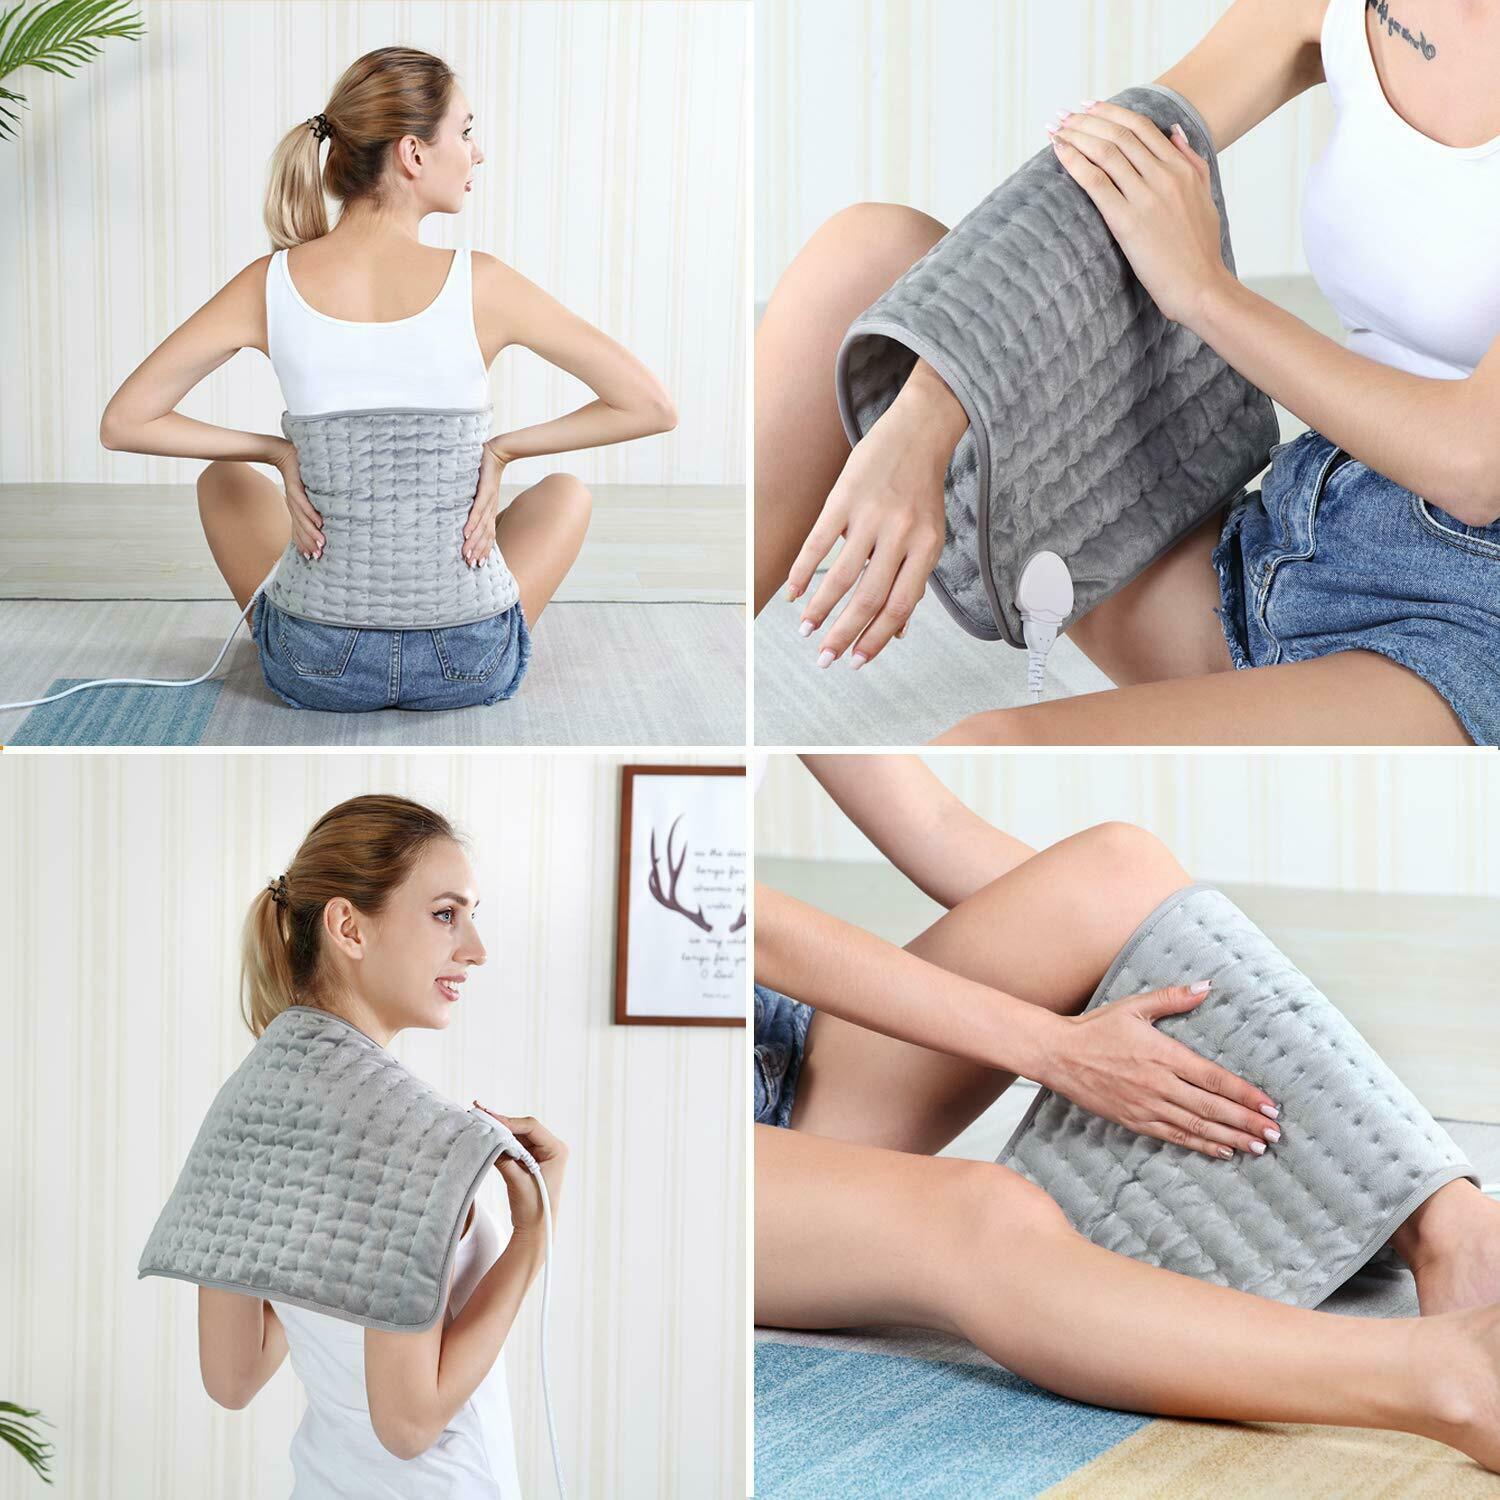 110-240V-120W-6-Level-Electric-Heating-Mat-Warming-4-Timer-Physiotherapy-Pad-Heated-Mat-Pain-Relief-1618477-7